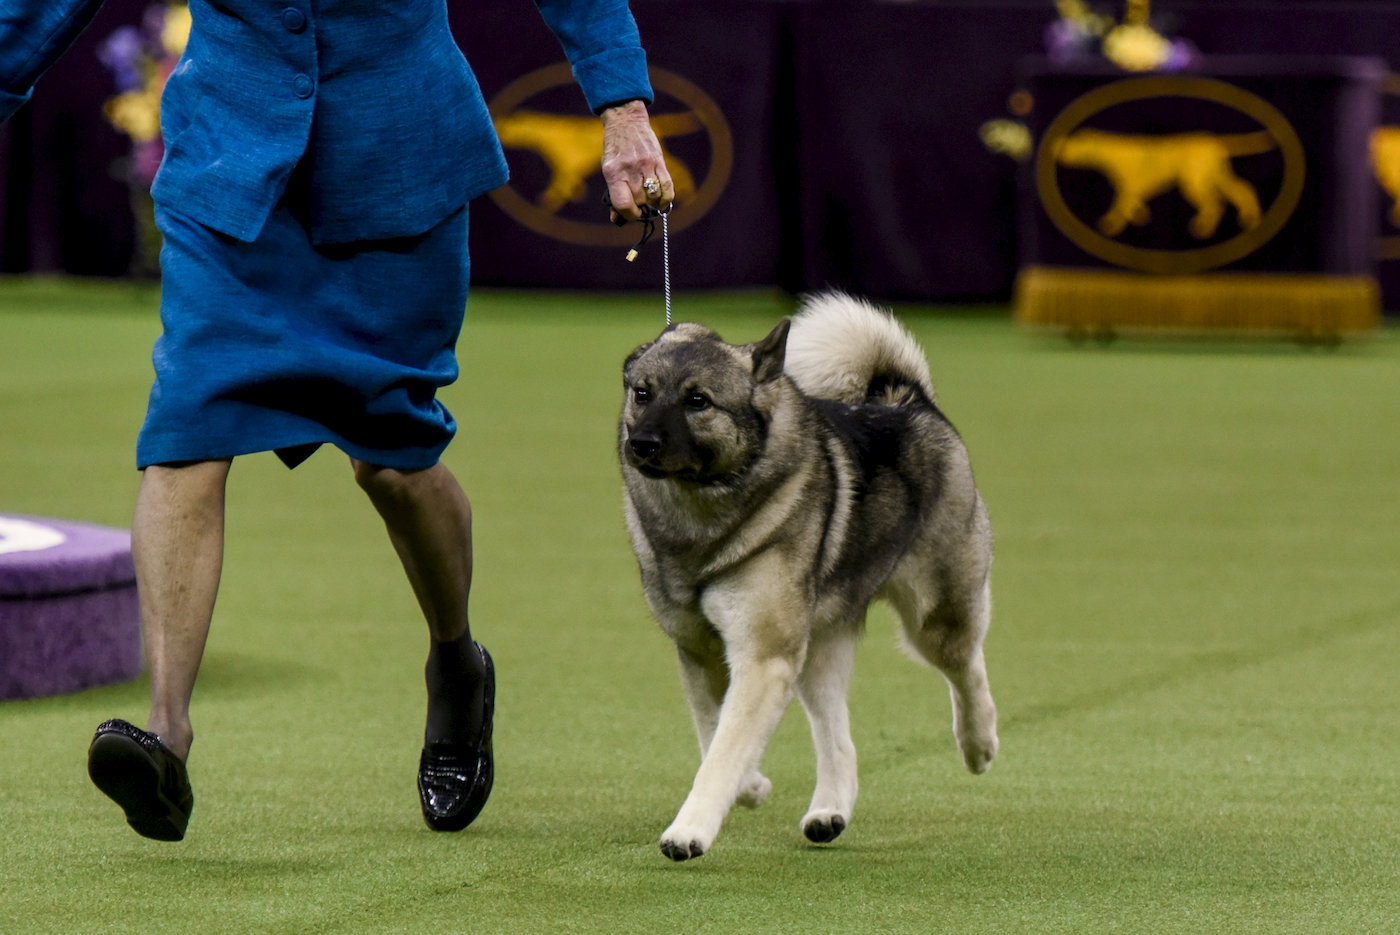 Elkhound, pekingese among firstday winners at Westminster dog show